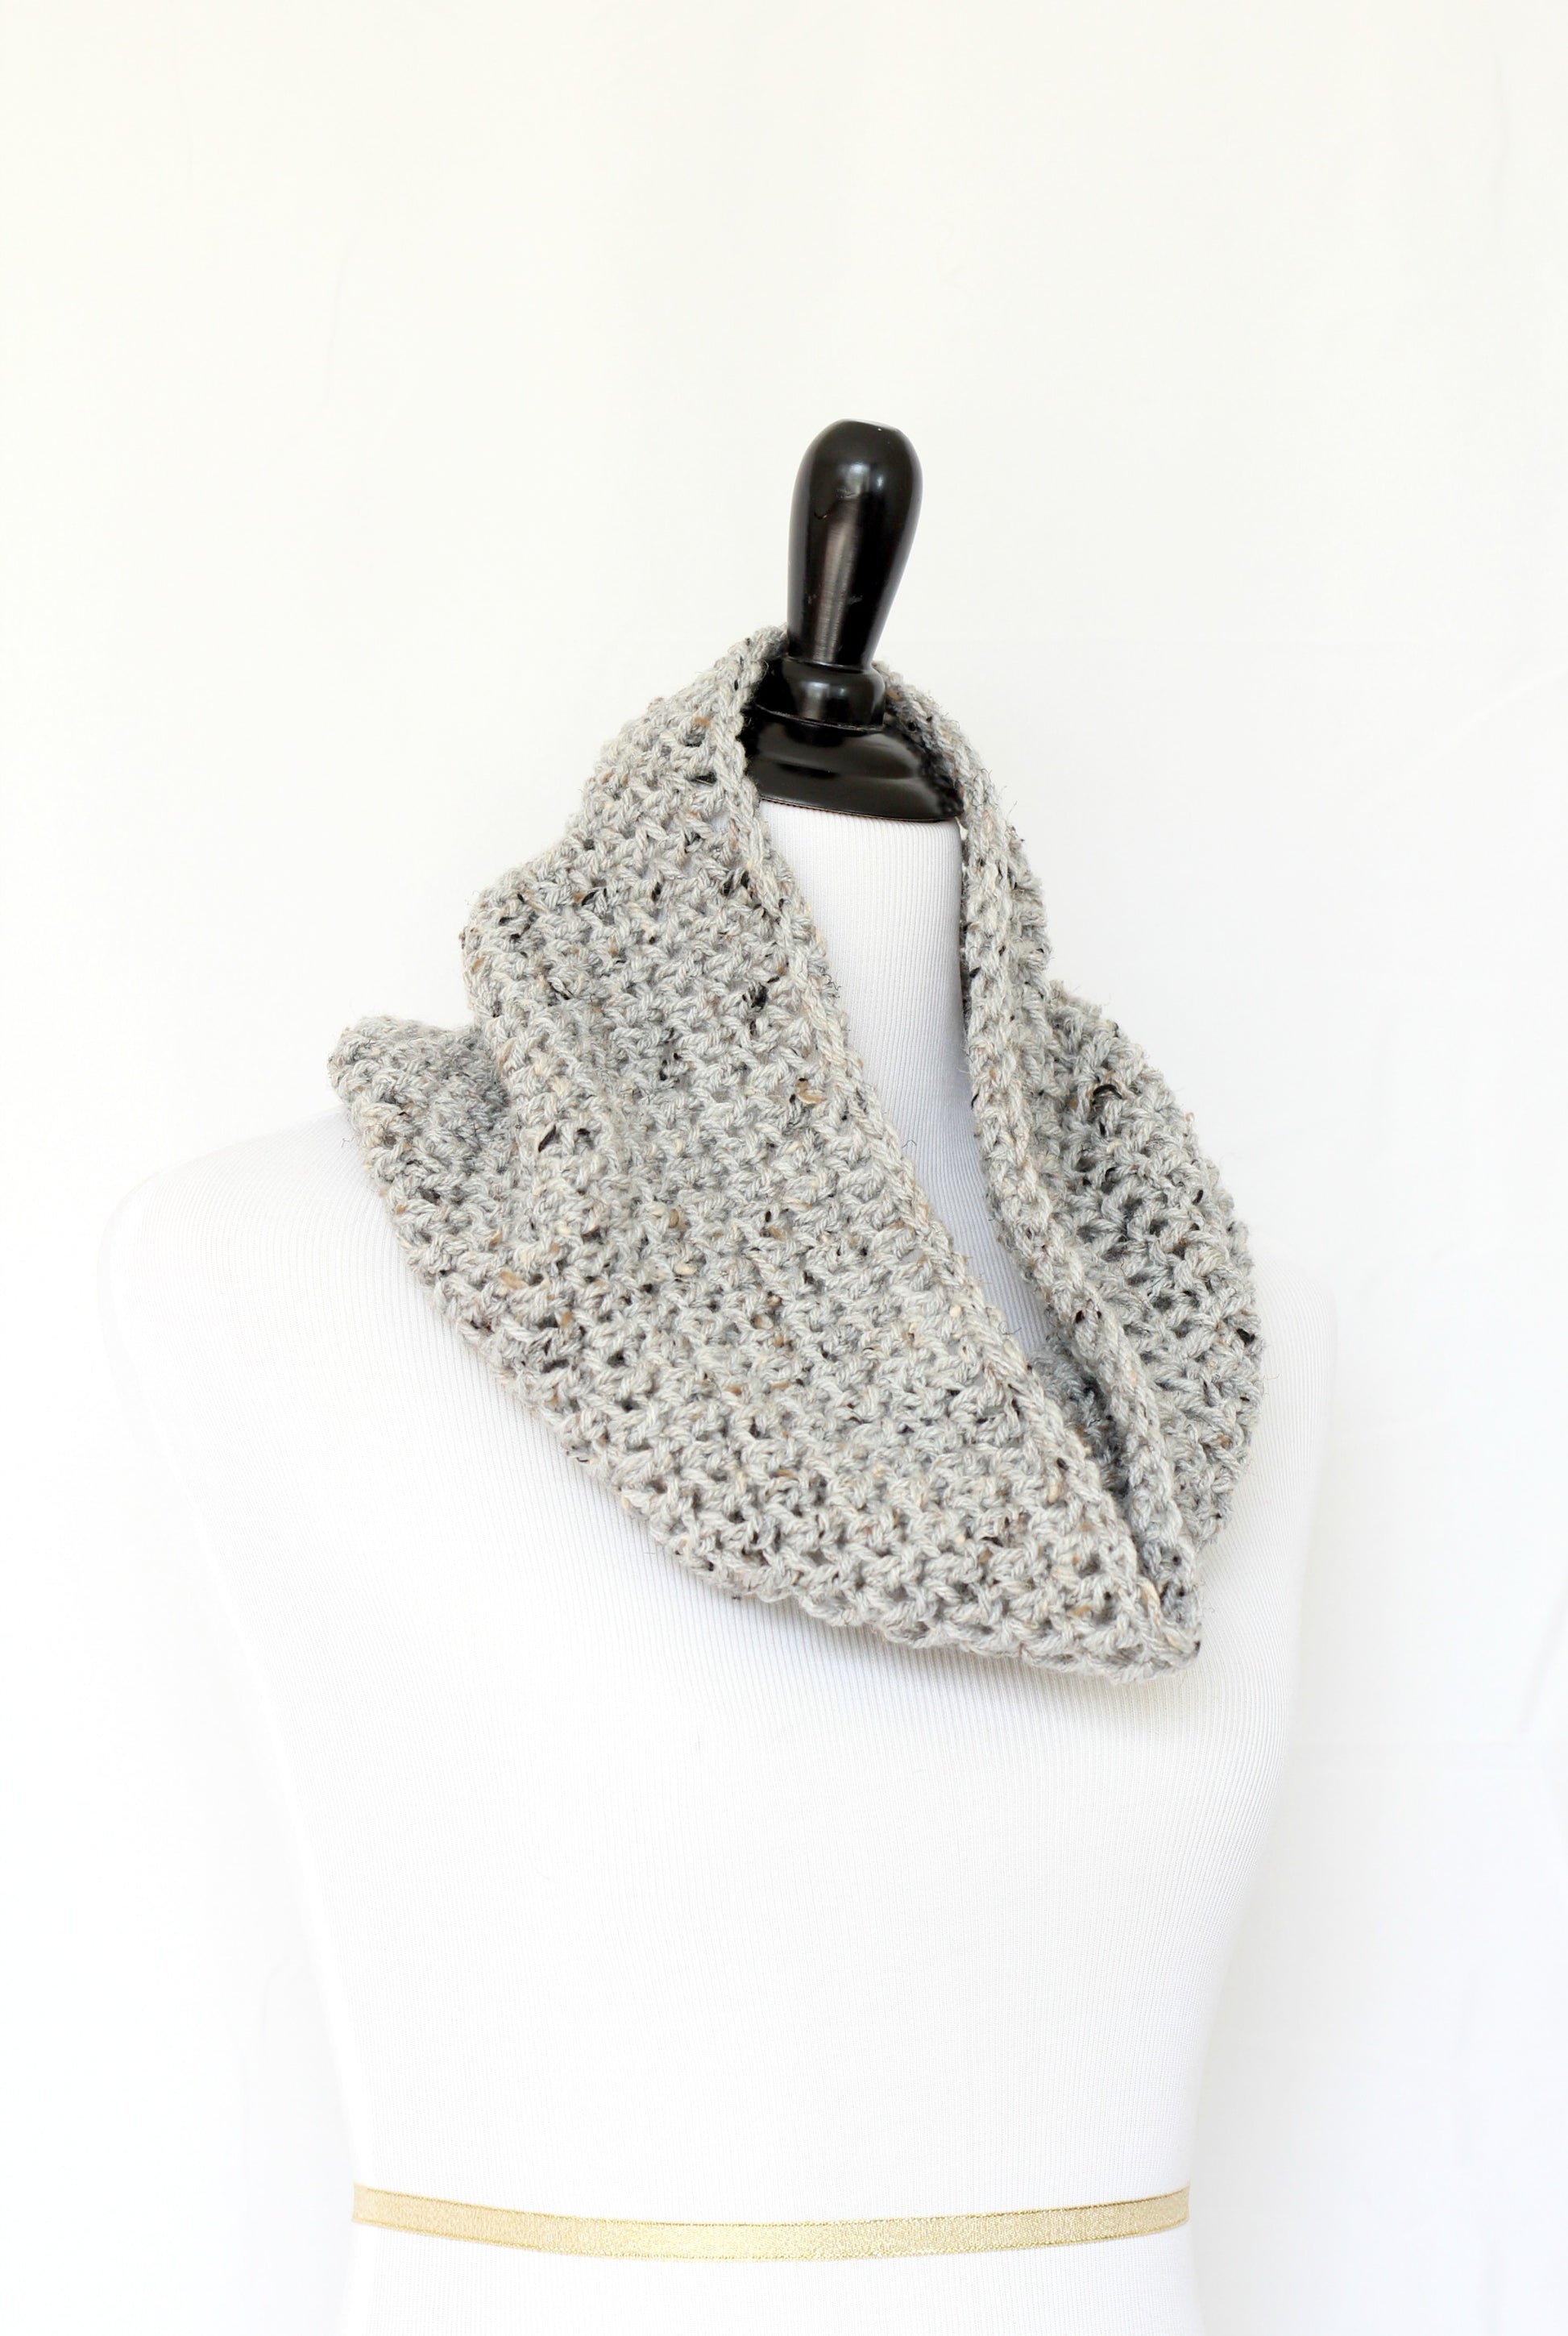 Crochet infinity scarf in grey color, chunky cowl